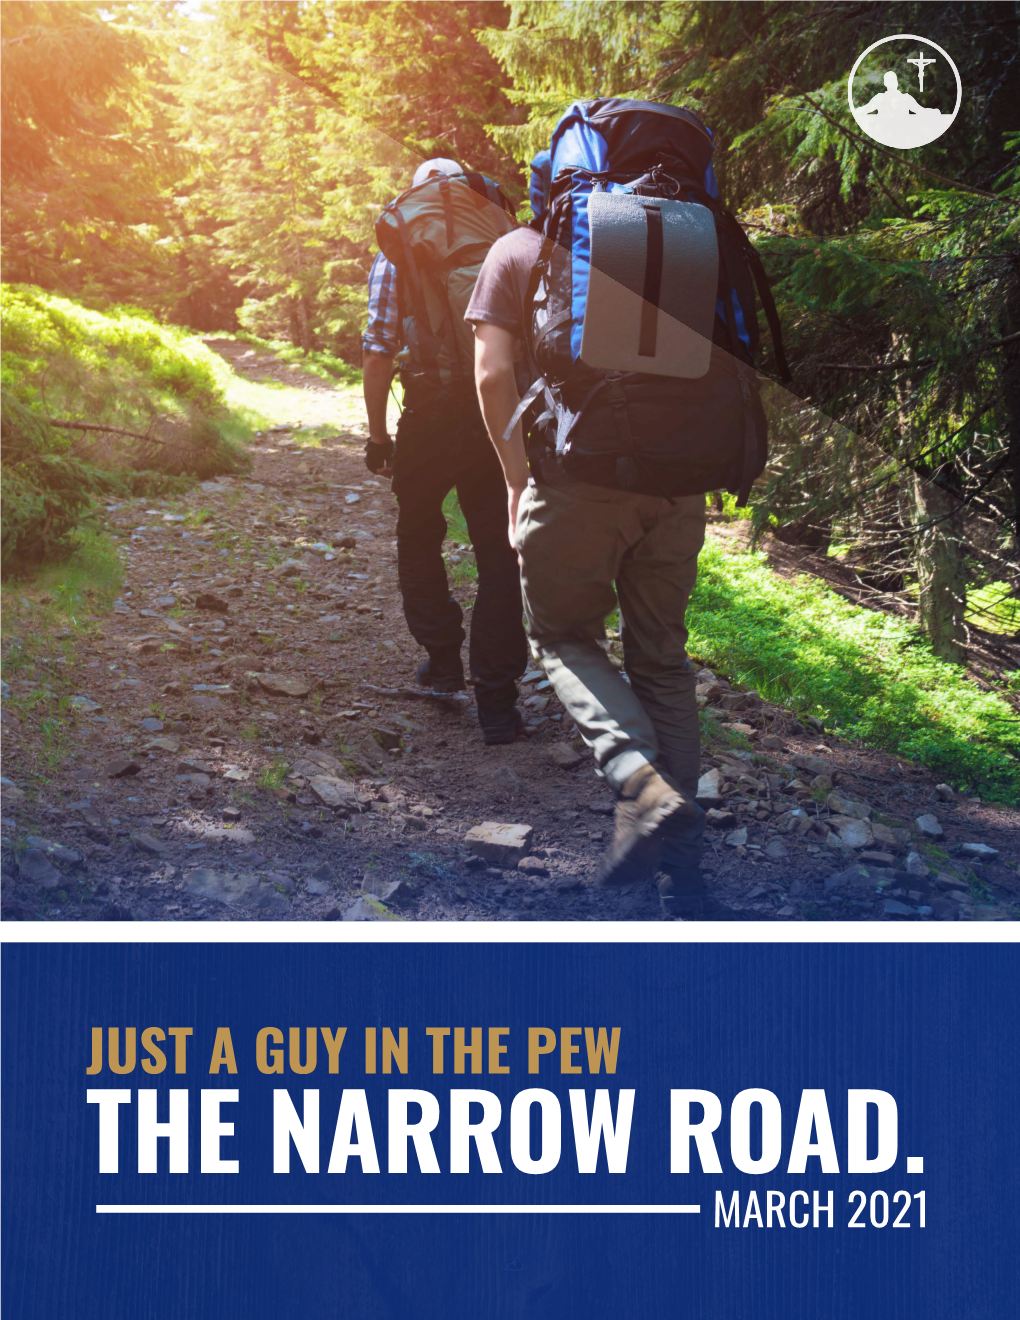 THE NARROW ROAD. MARCH 2021 the NARROW ROAD the EVERYDAY GUIDE for the EVERYDAY GUY in Loving Memory of Bill Platten